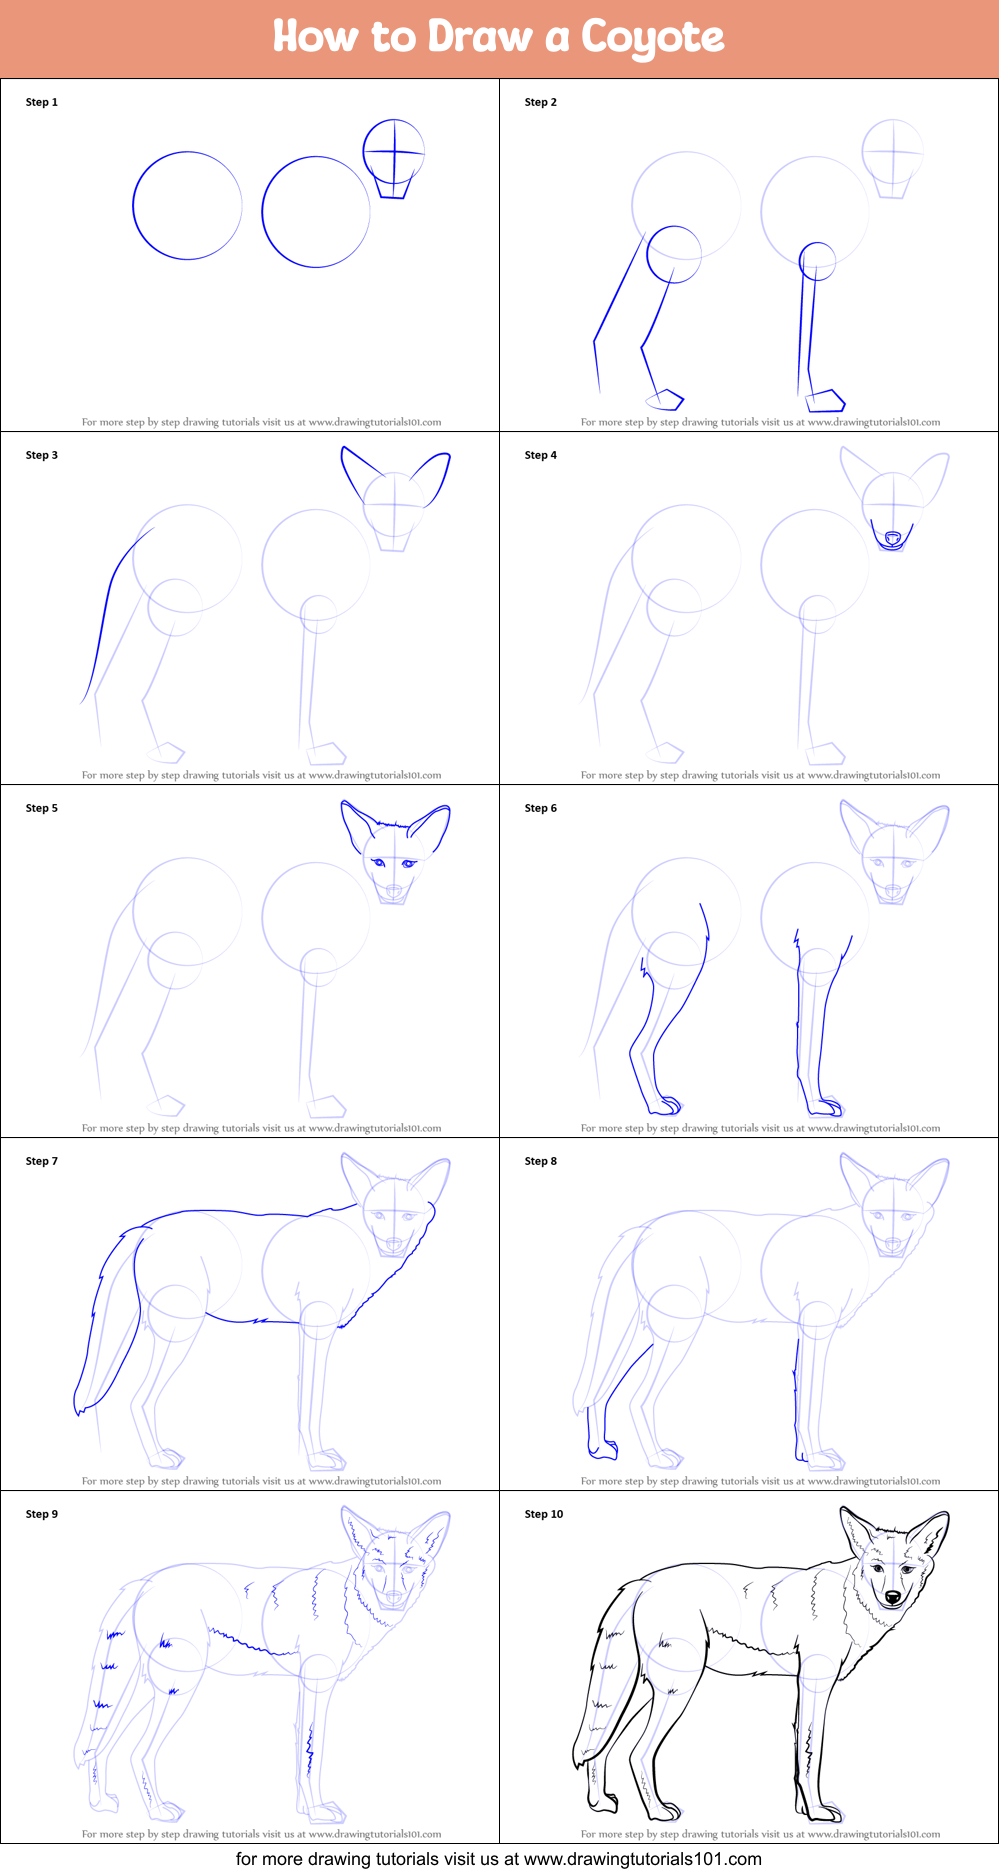 how-to-draw-a-coyote-printable-step-by-step-drawing-sheet